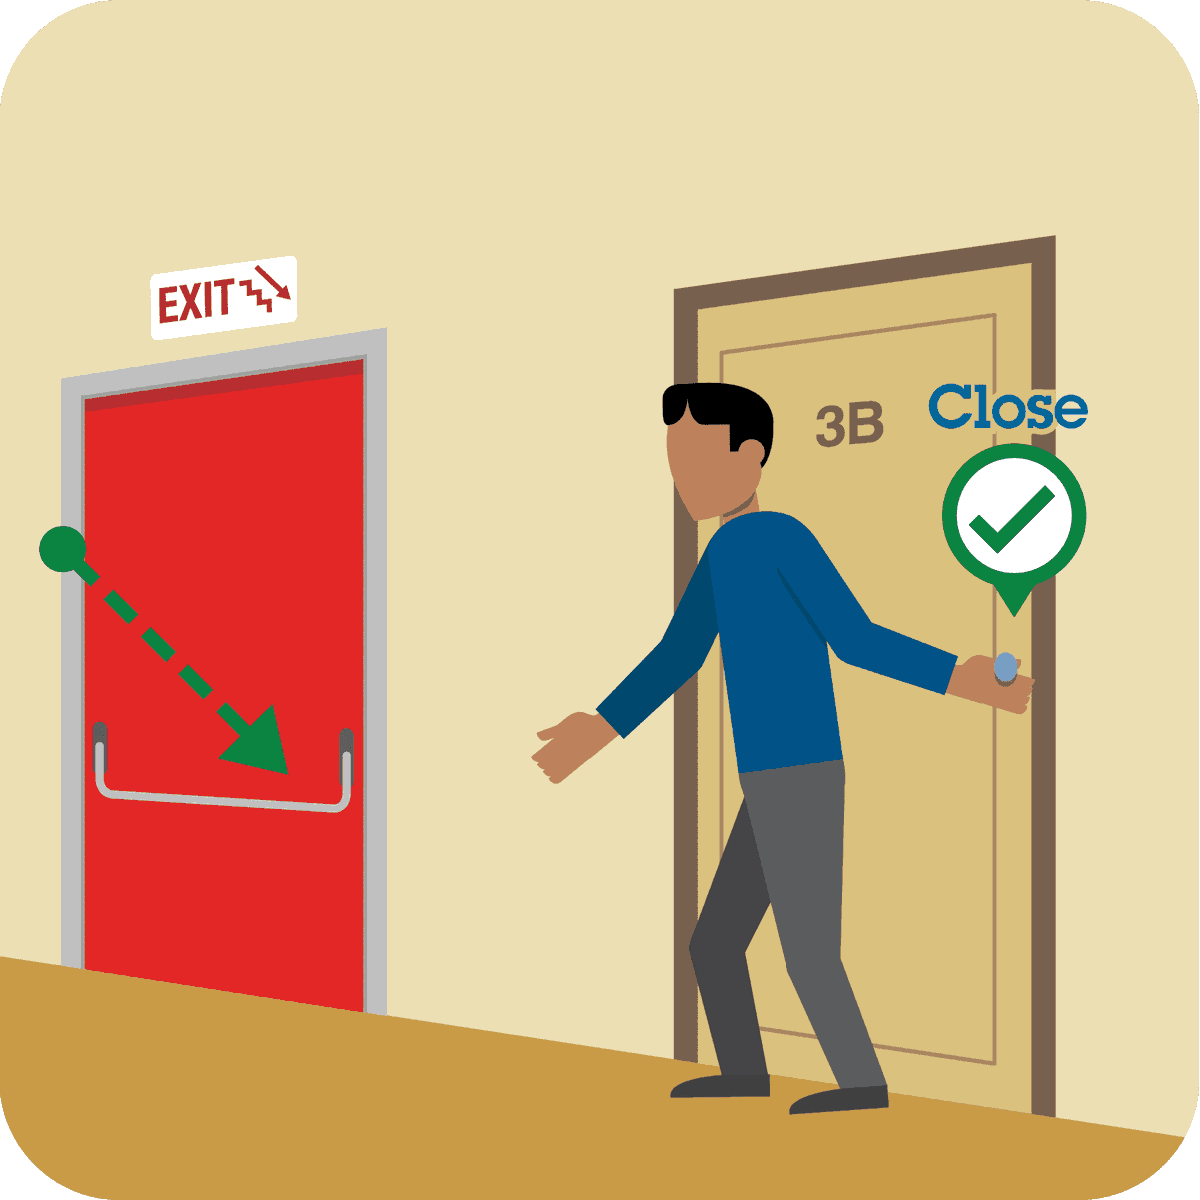 If the alarm sounds, leave right away, closing all doors behind you. Use the stairs — never use elevators during a fire. #HotelFireSafety #FireSafetyTips #BeSafe